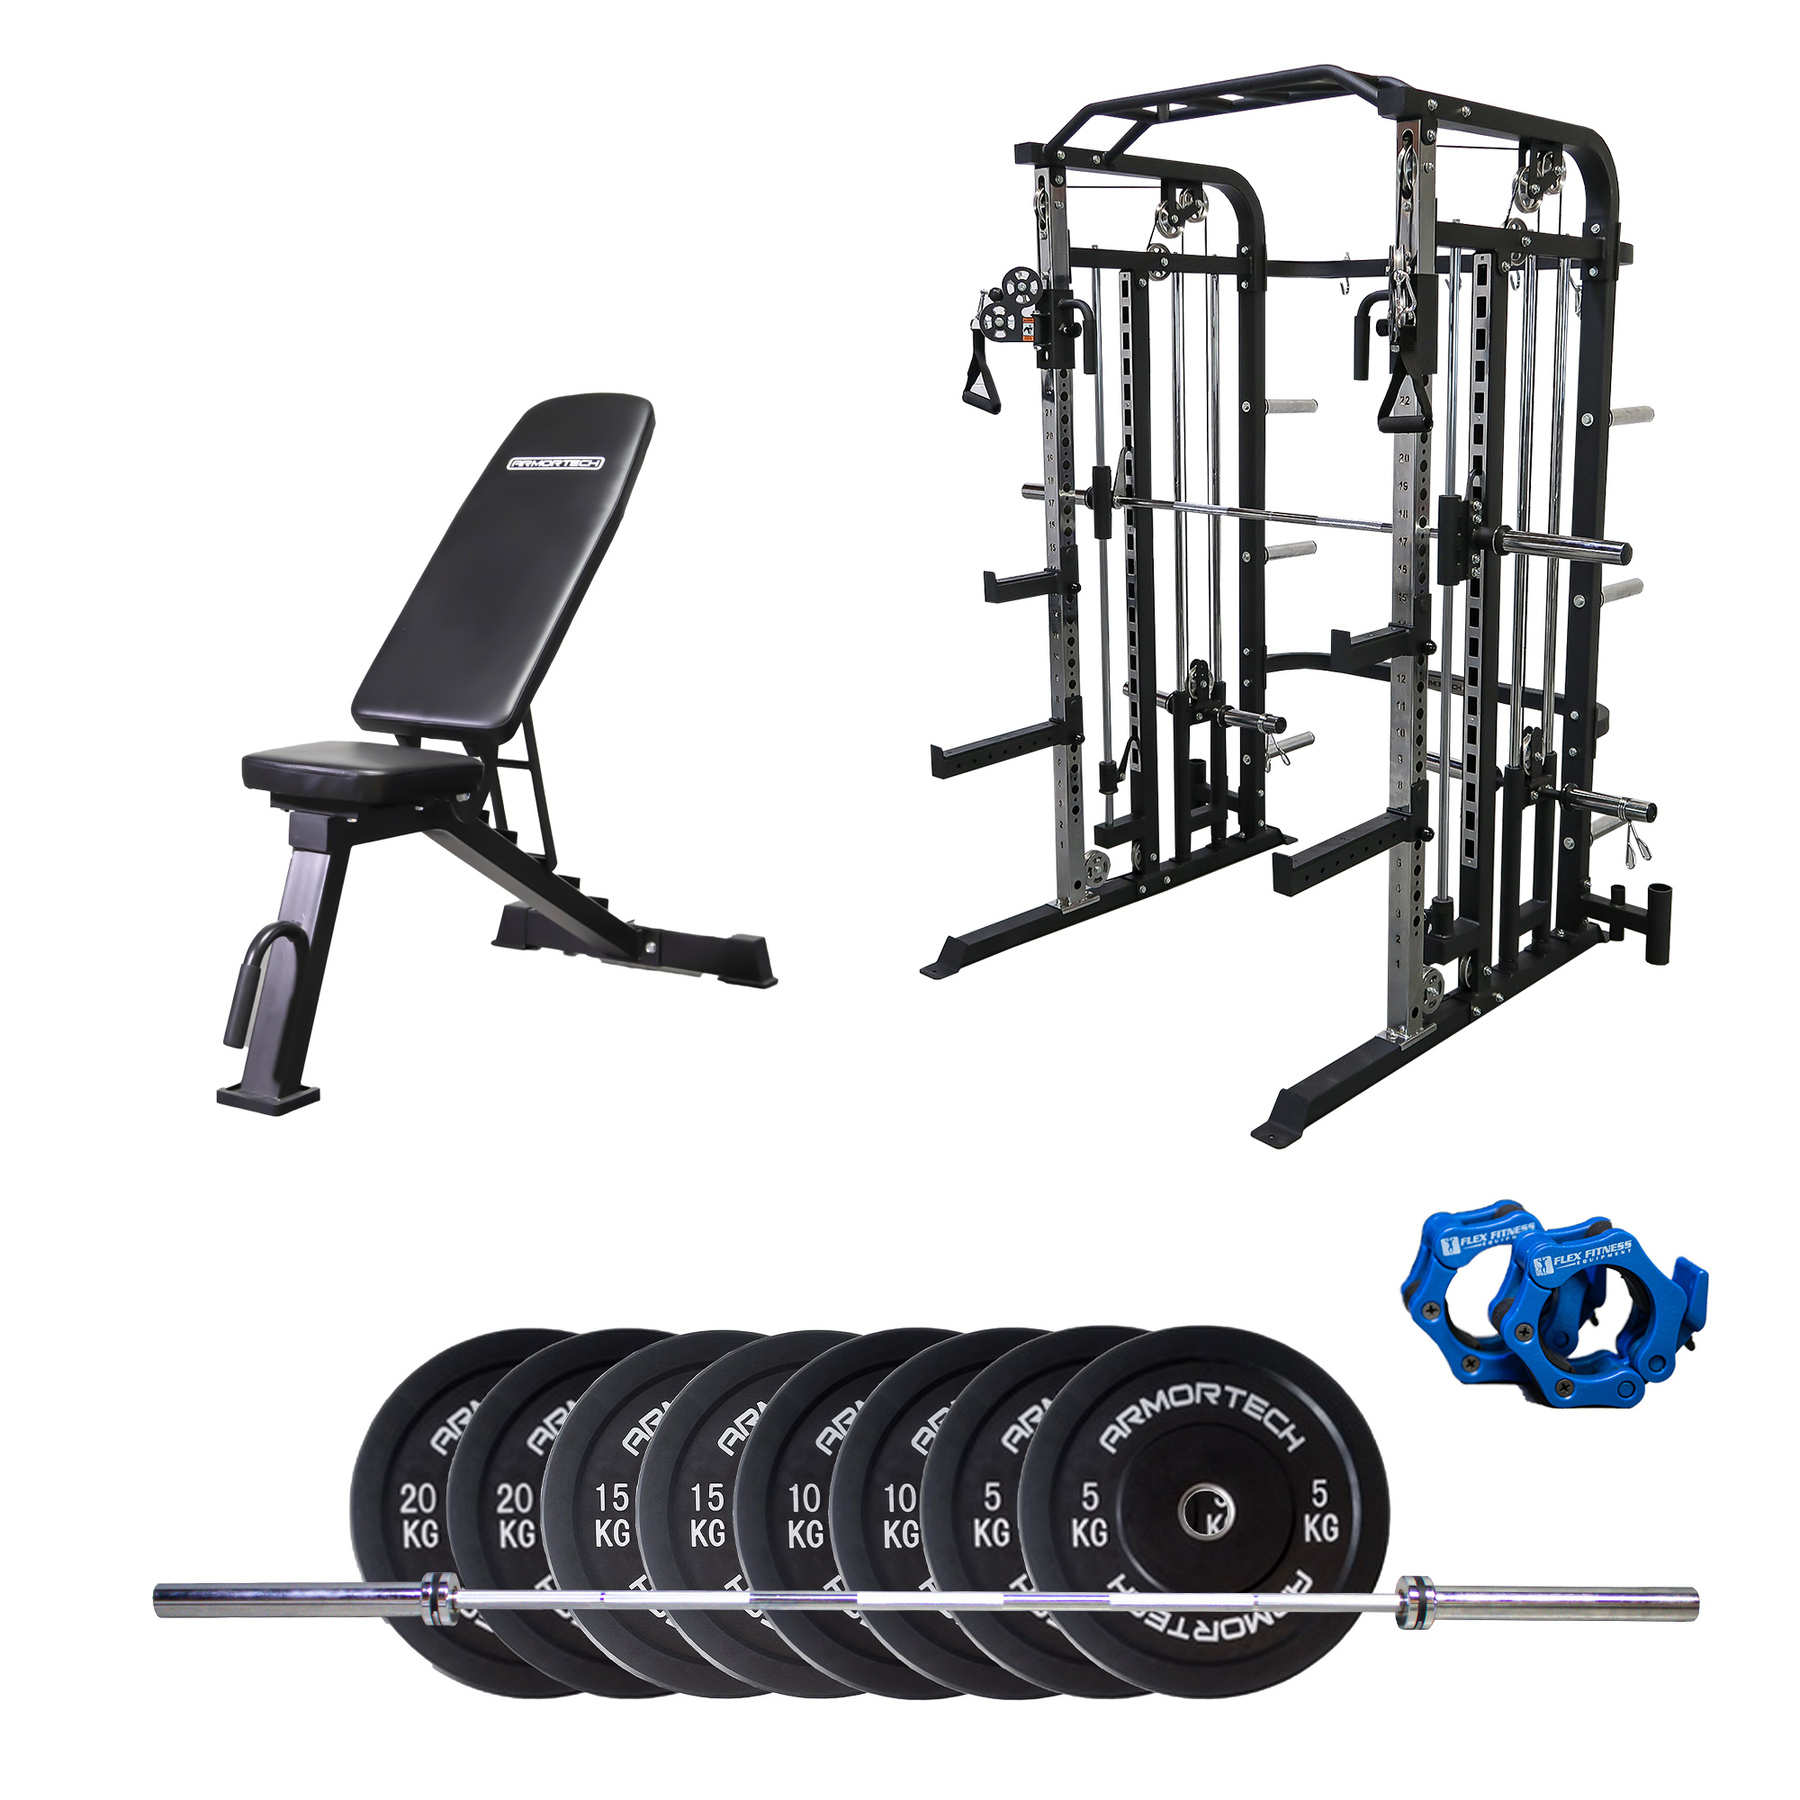 HASHTAG FITNESS adjustable 5 in 1 gym bench height 29 to 54 bench press  for home gym incline decline bench